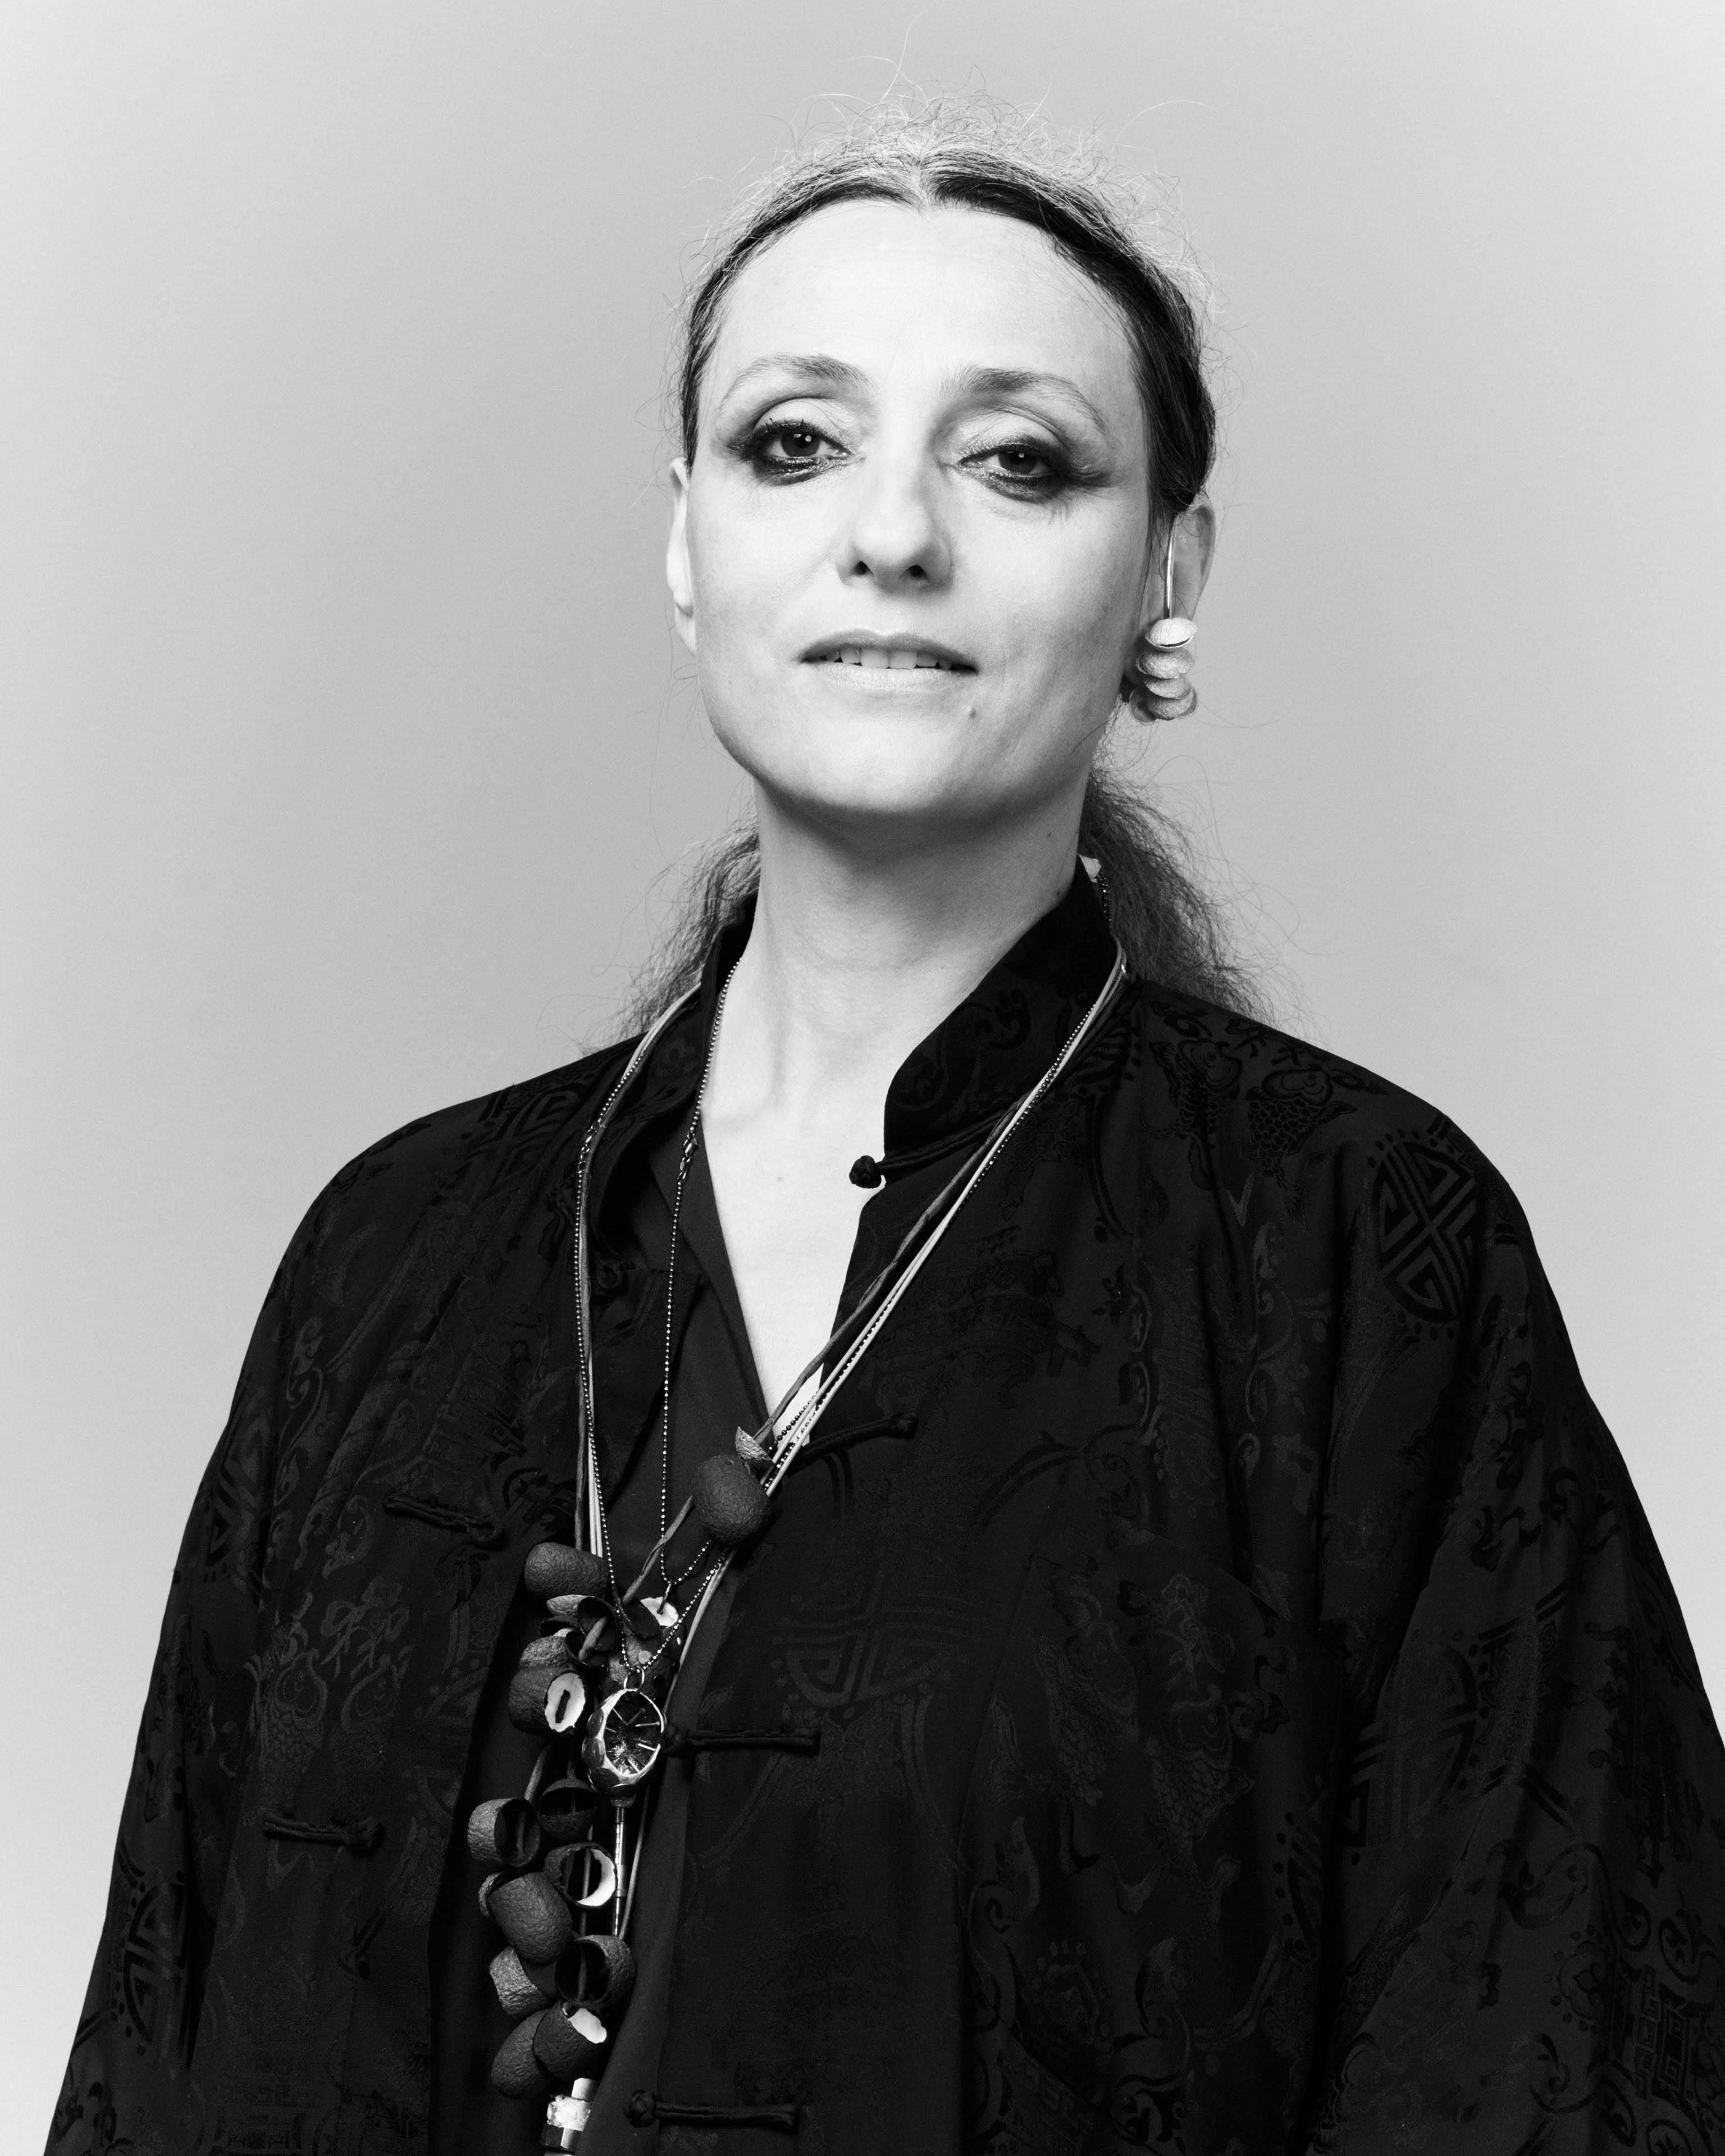 Artist Maja Vukoje wears several silk cocoon necklaces over a black blouse, an earring with white cocoon parts hangs from her ear, she looks serious, her long hair is tied up